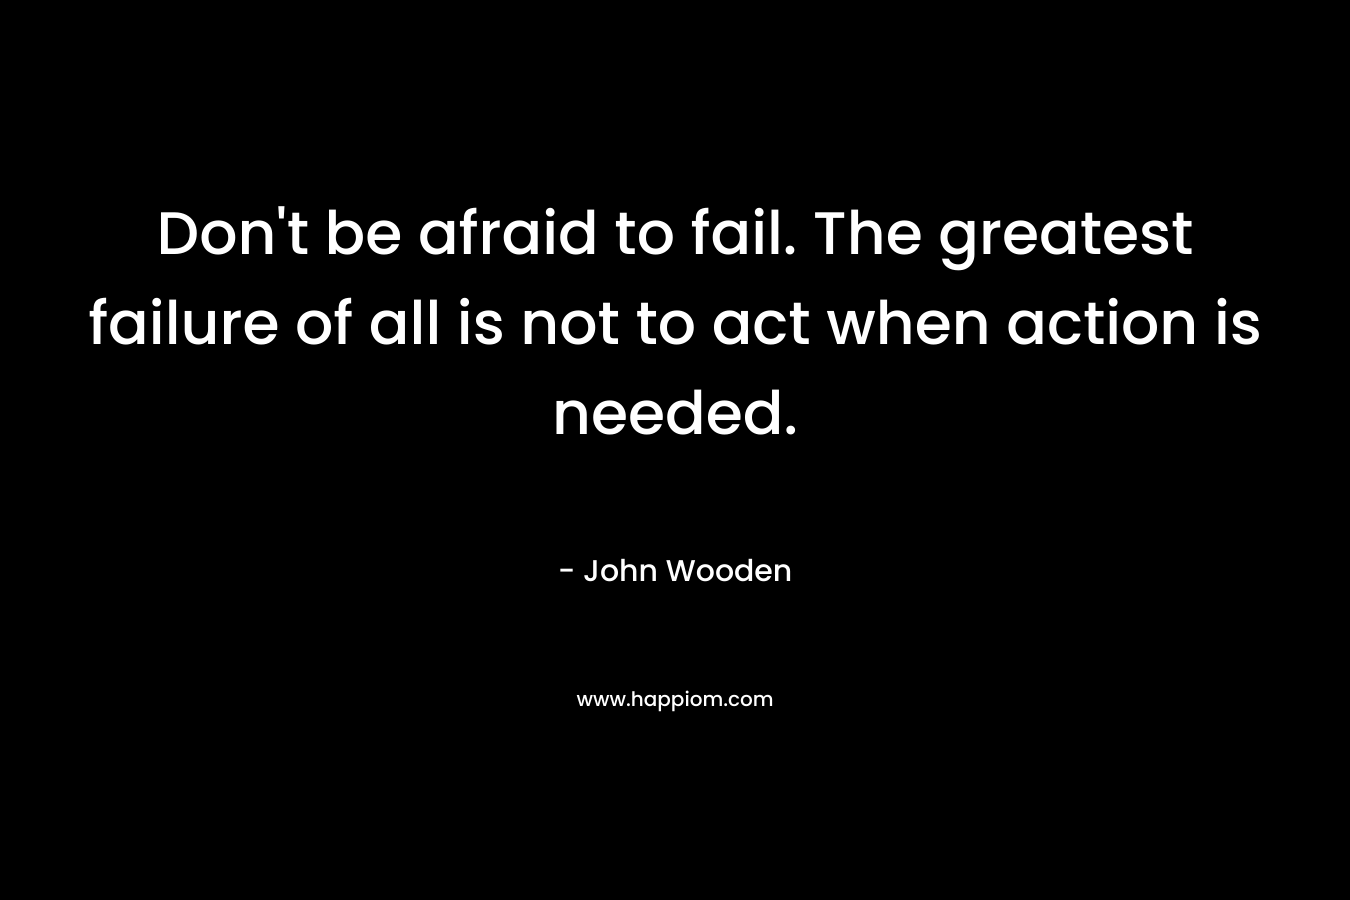 Don't be afraid to fail. The greatest failure of all is not to act when action is needed.